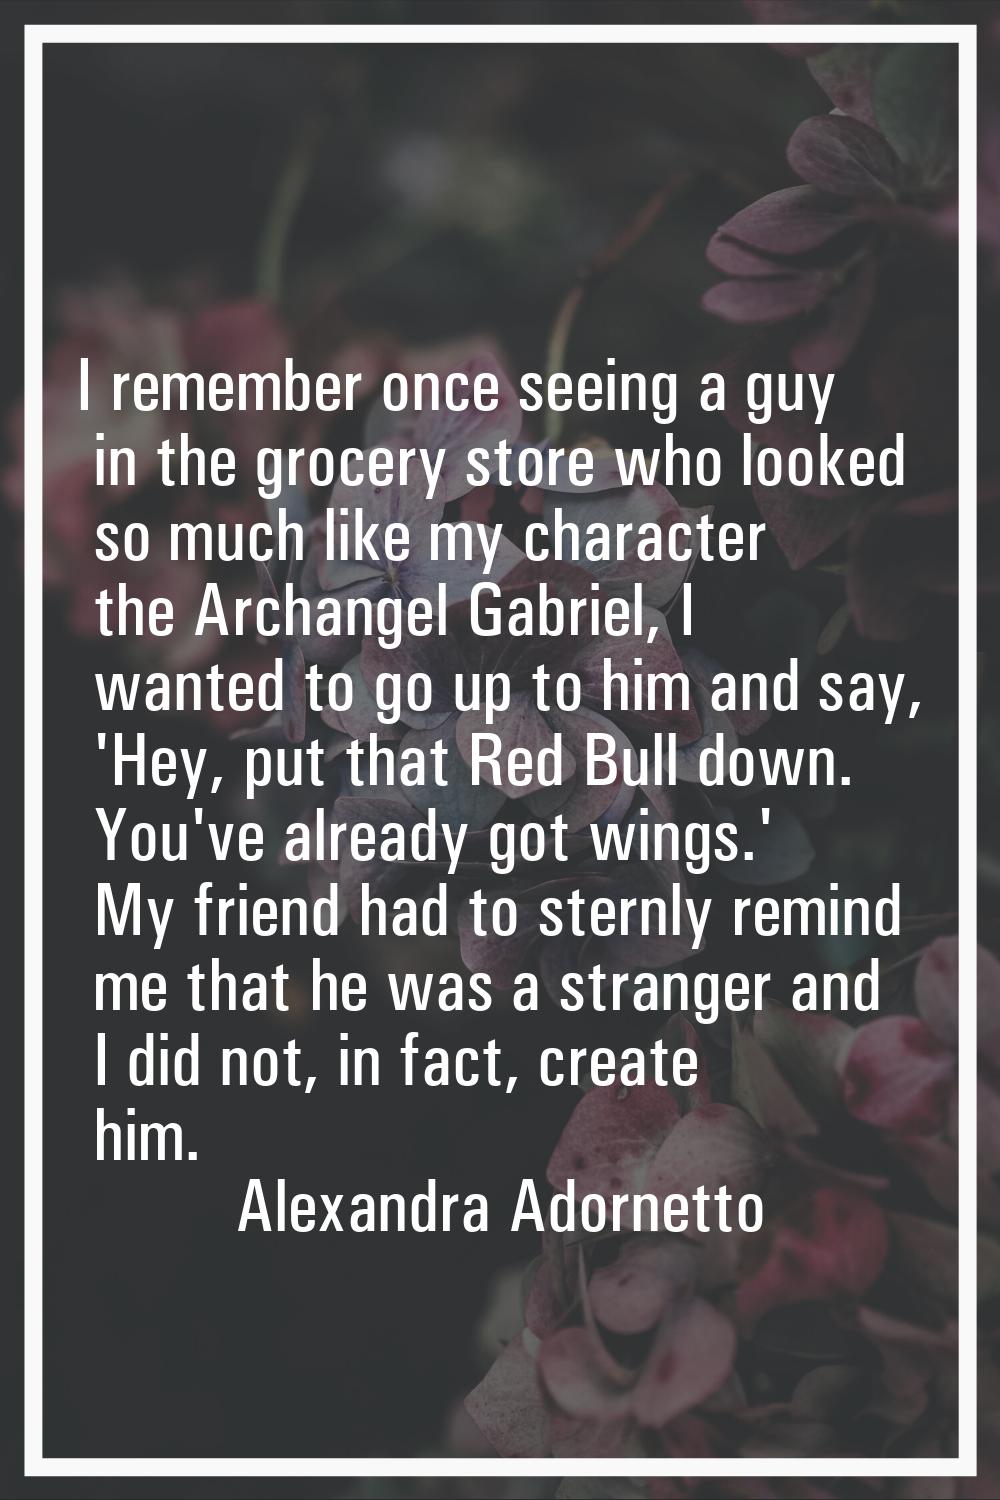 I remember once seeing a guy in the grocery store who looked so much like my character the Archange